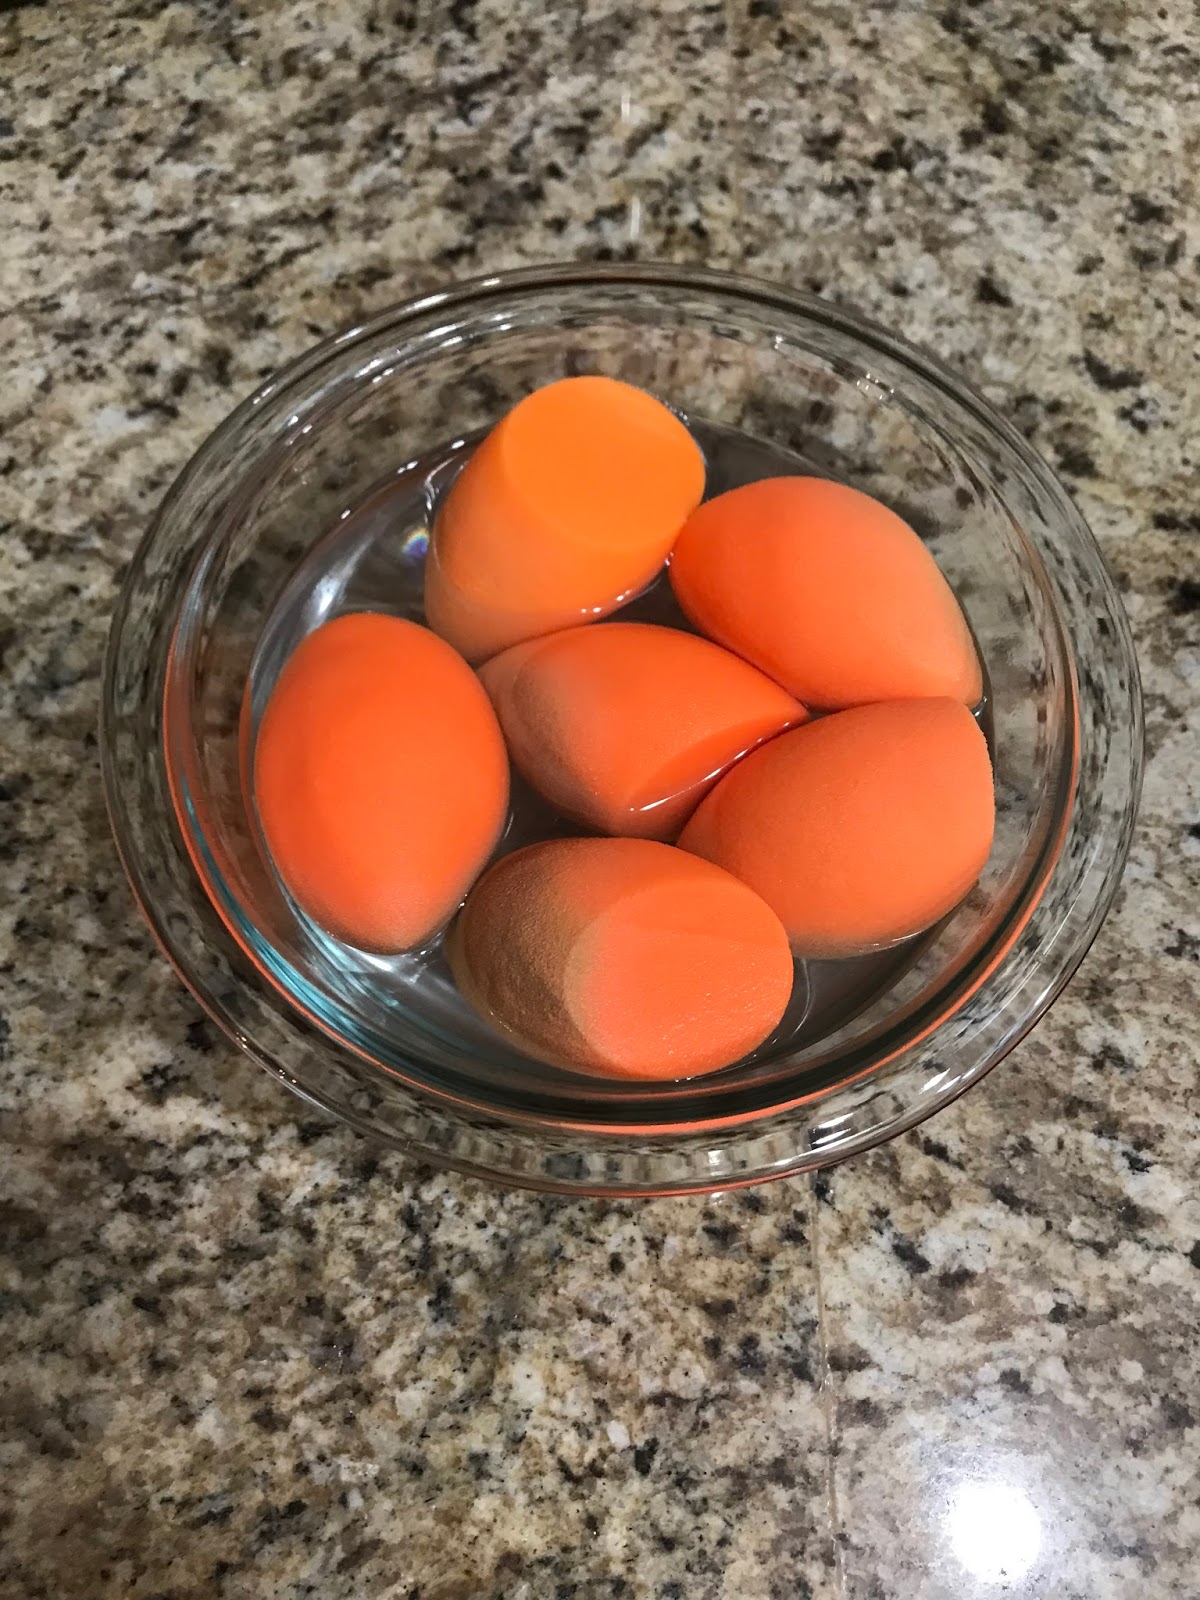 Emily Kathleen Taylor: How To Clean Beauty Blenders In 5 Minutes